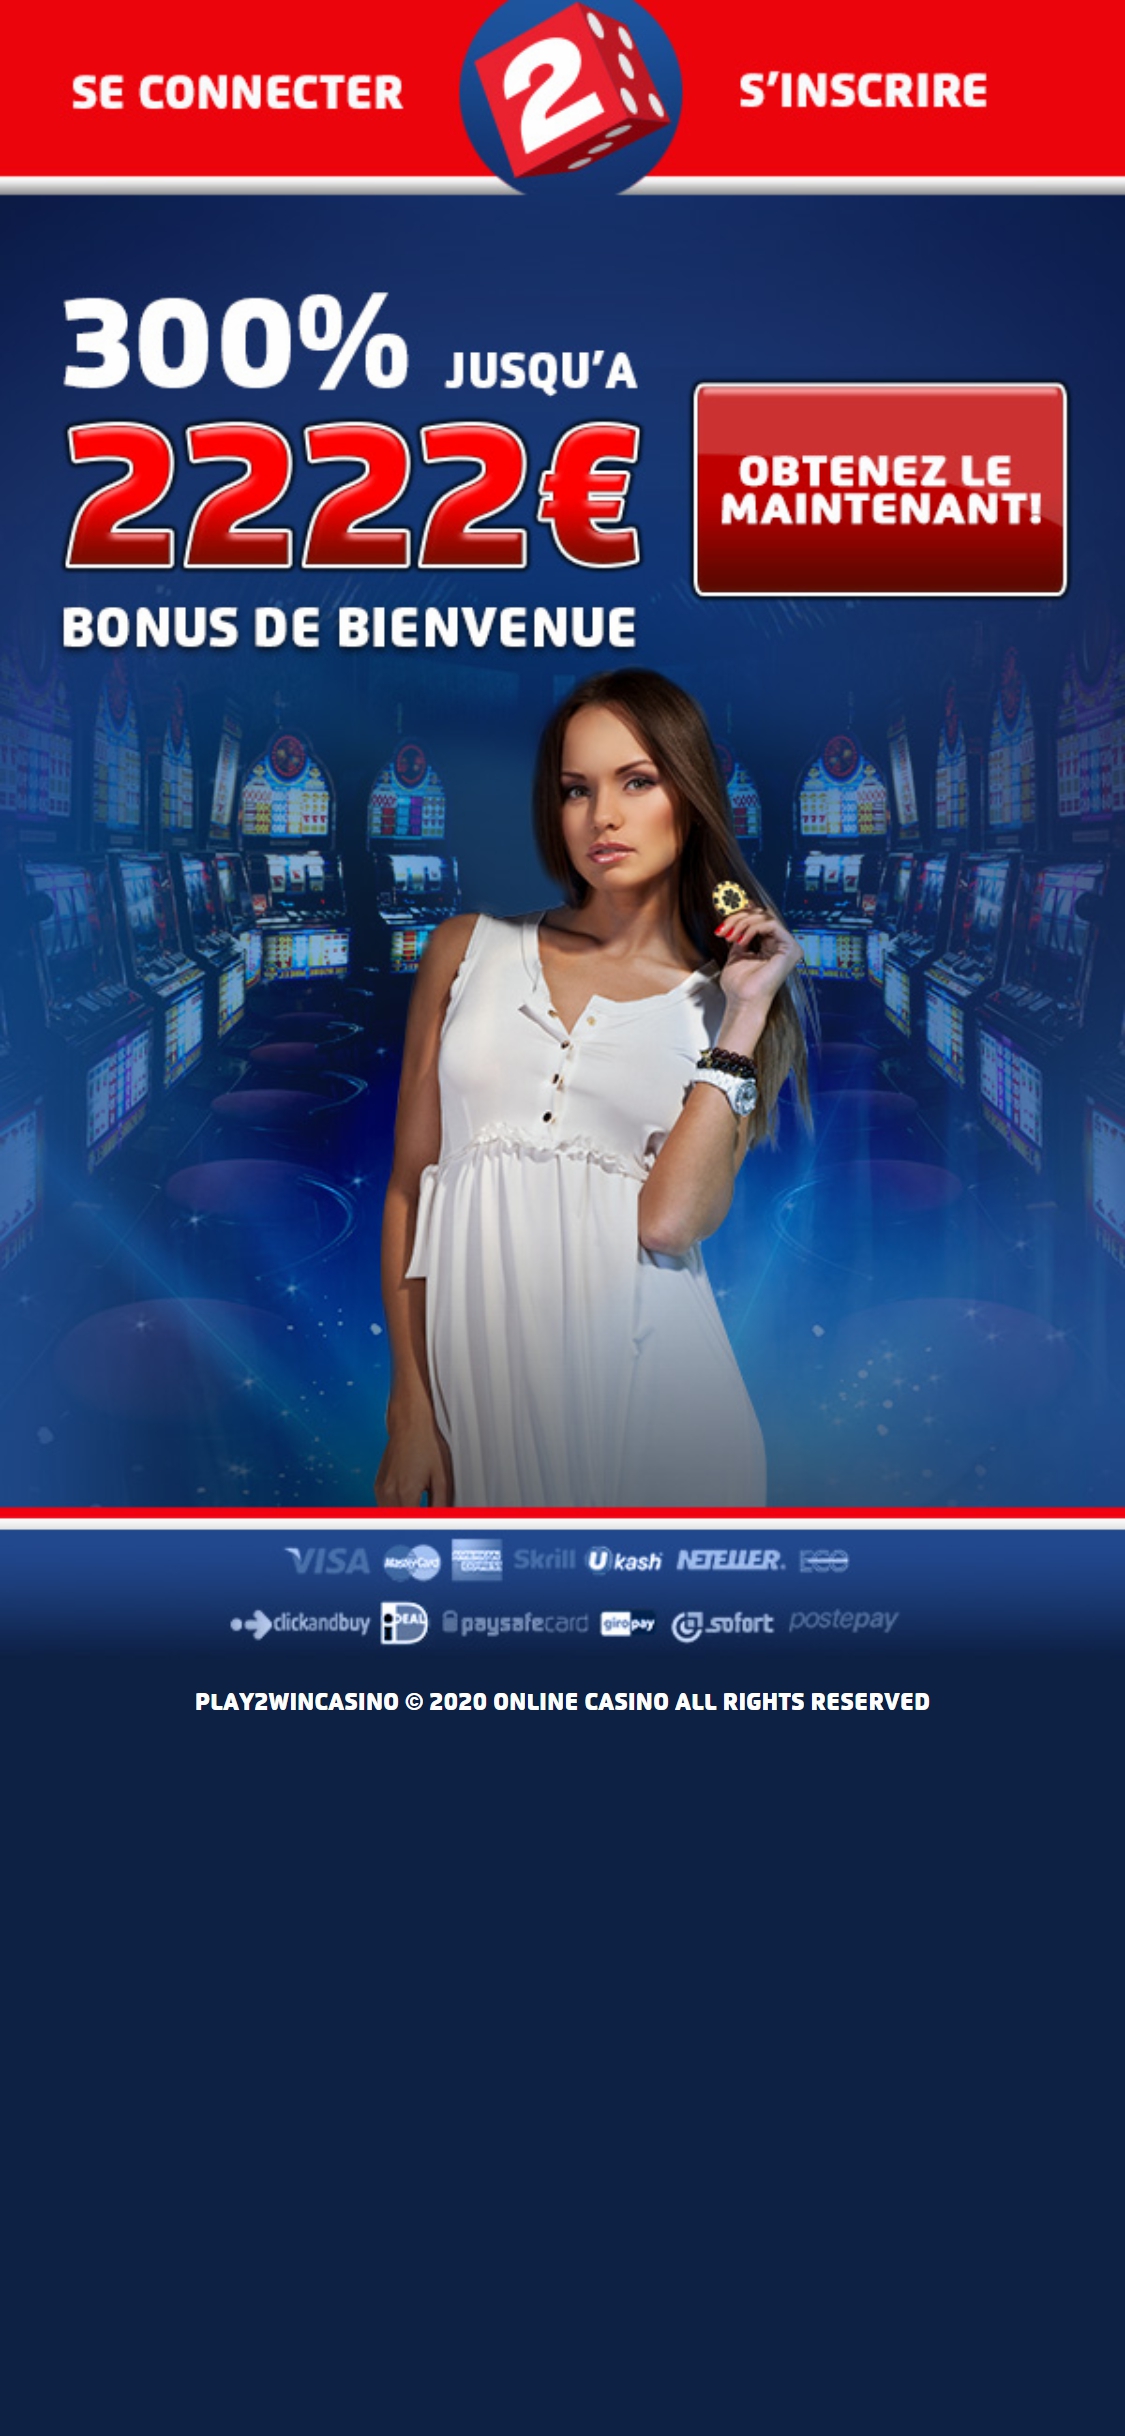 Play2Win Casino Mobile Review